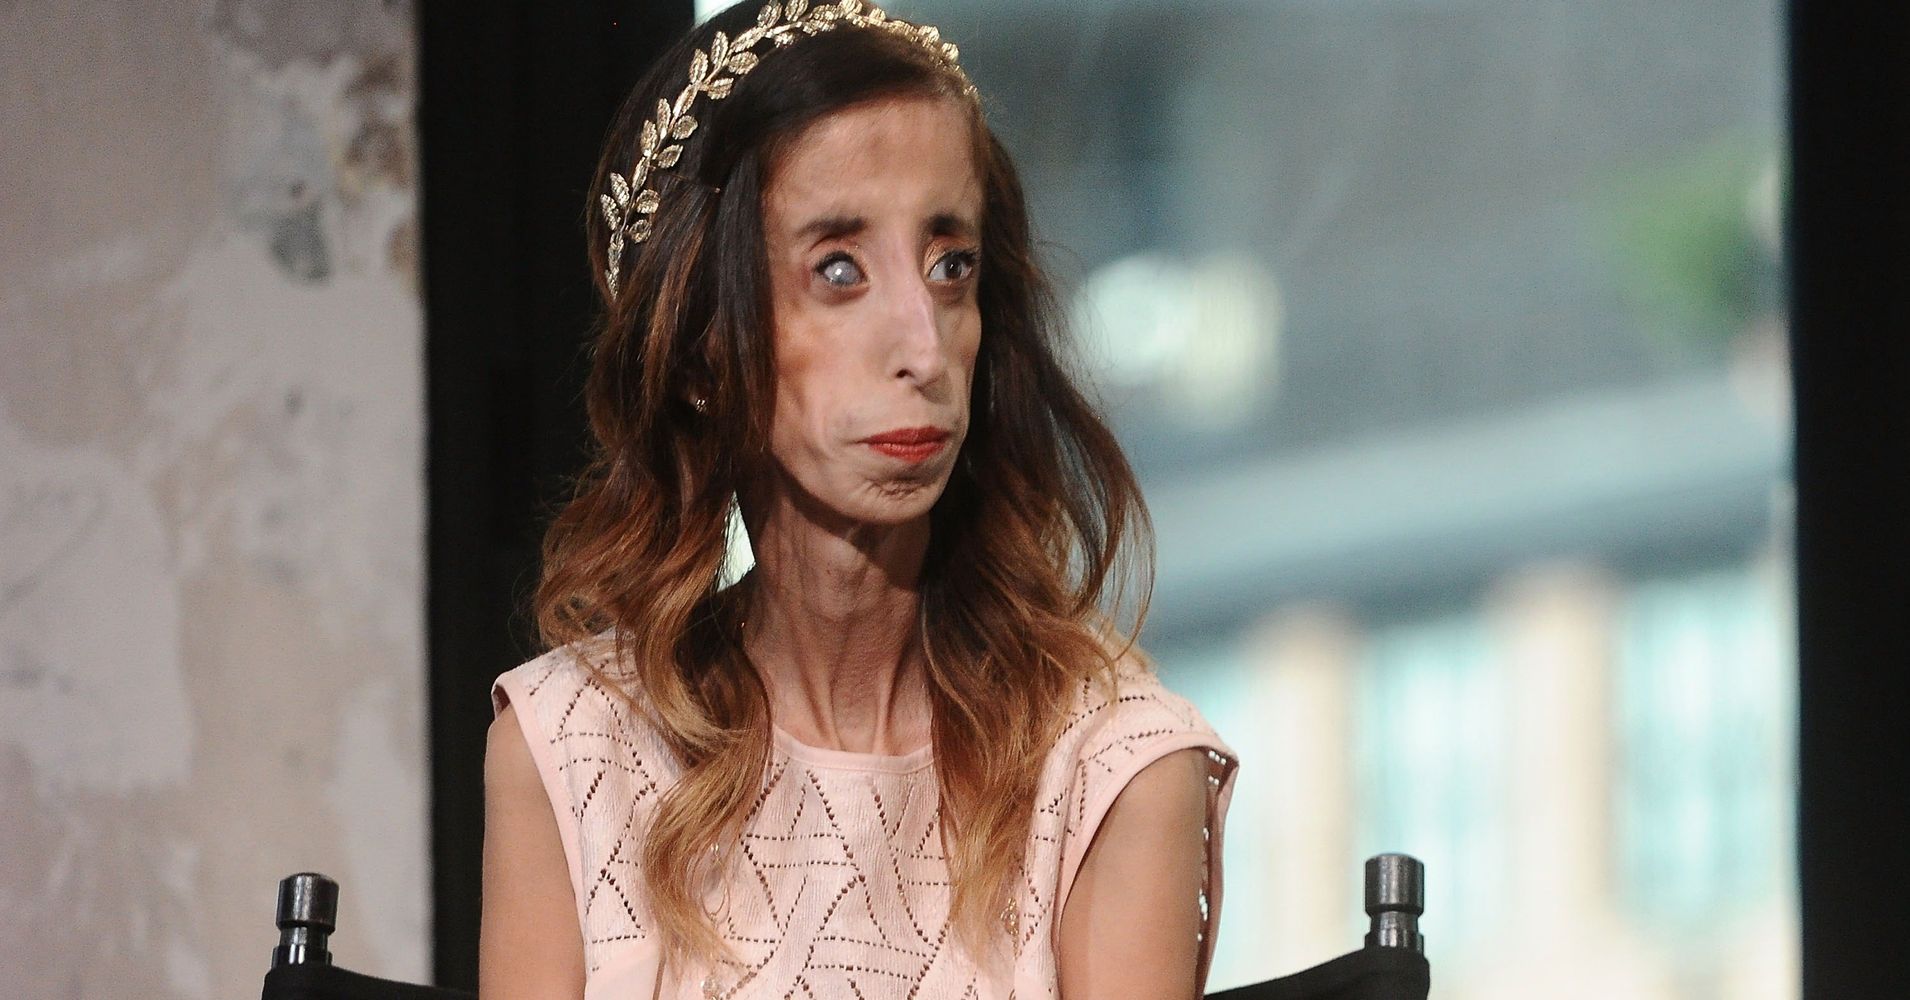 Lizzie Velasquez Shares Moving Message About Online Bullying | HuffPost